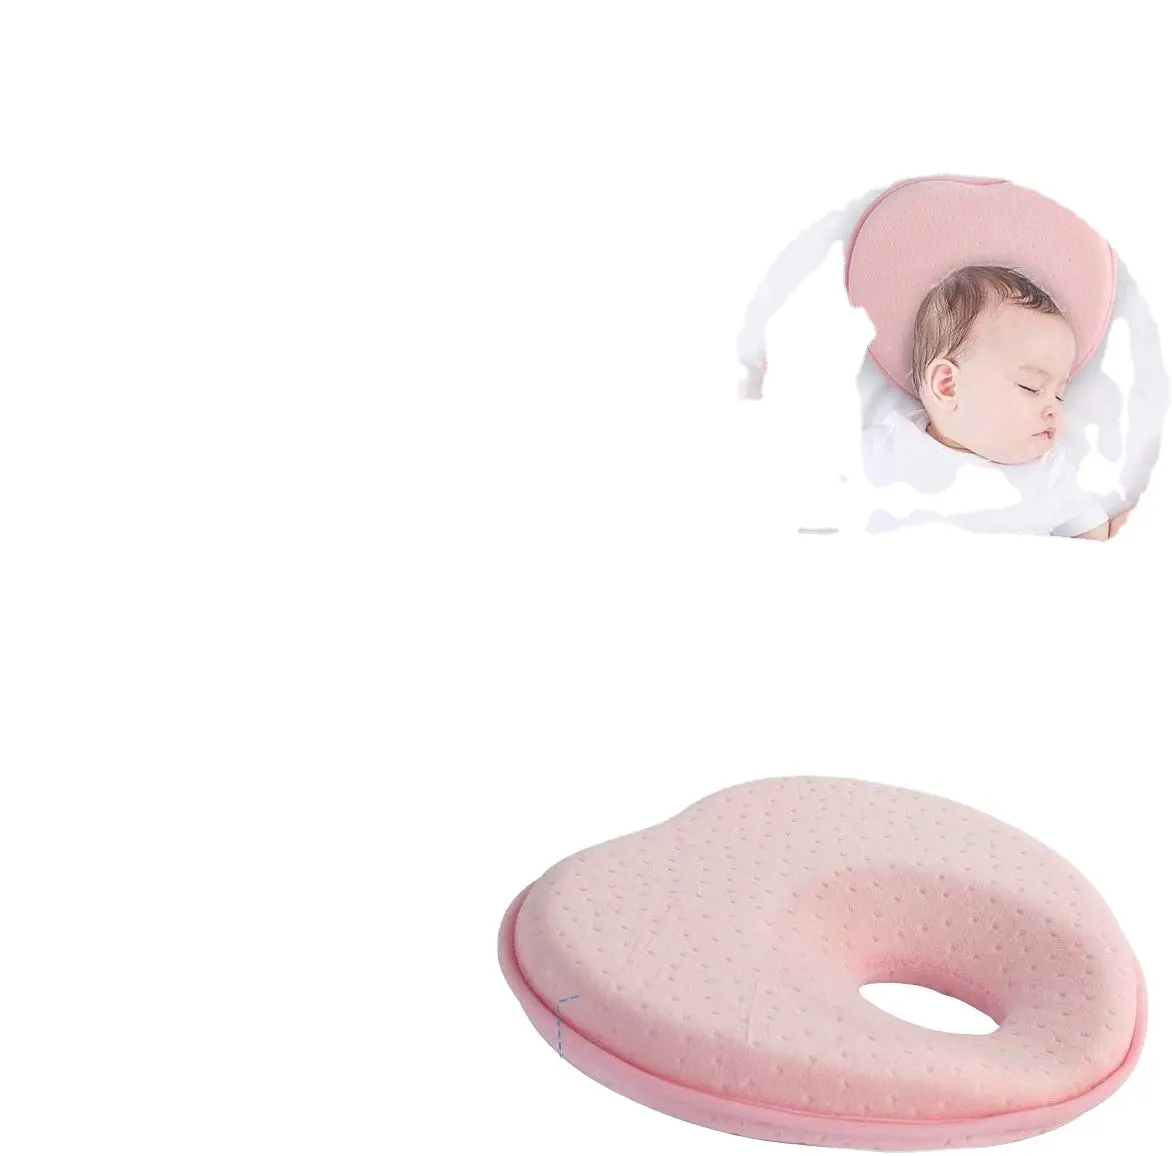 Baby Pillow Memory Foam infant Pillows with Skin friendly Breathable pillow cover